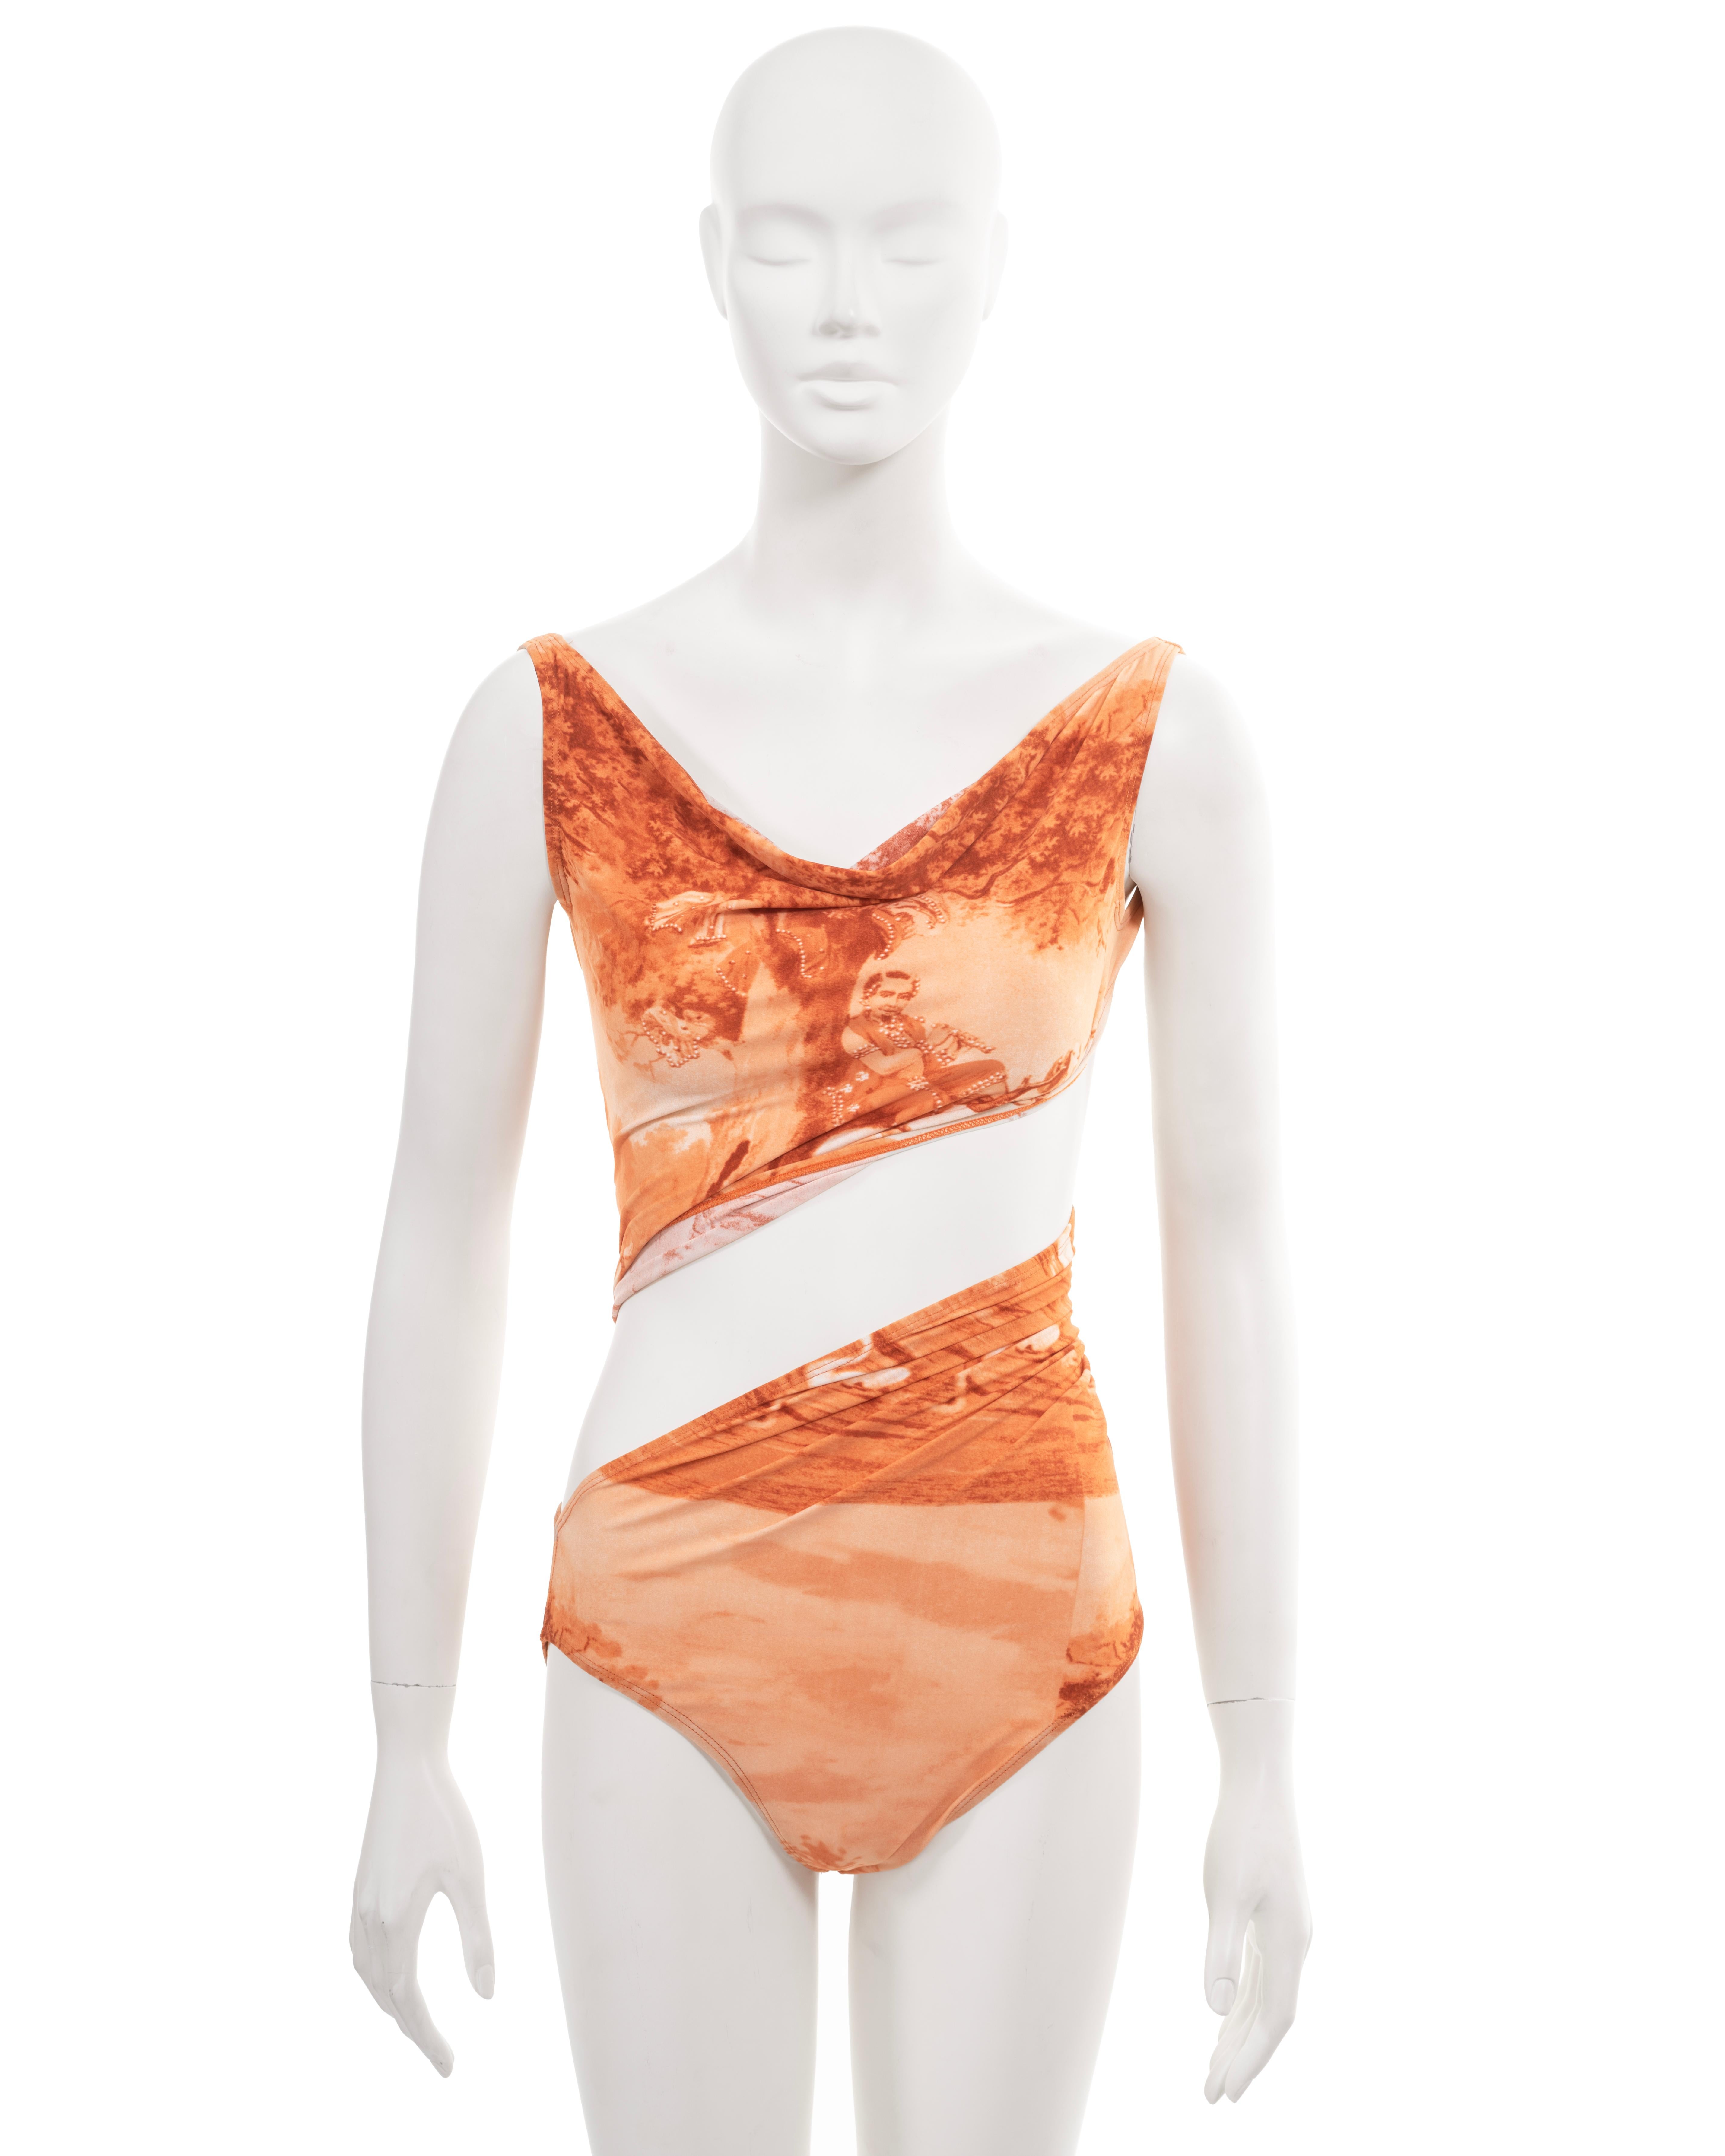 ▪ Archival Jean Paul Gaultier bodysuit 
▪ Spring-Summer 1998
▪ Sold by One of a Kind Archive
▪ Allover orange print features the artwork 'Krishna Leela' by Raja Ravi Varma (1910)
▪ A single piece that wraps around the body, creating a cut-out